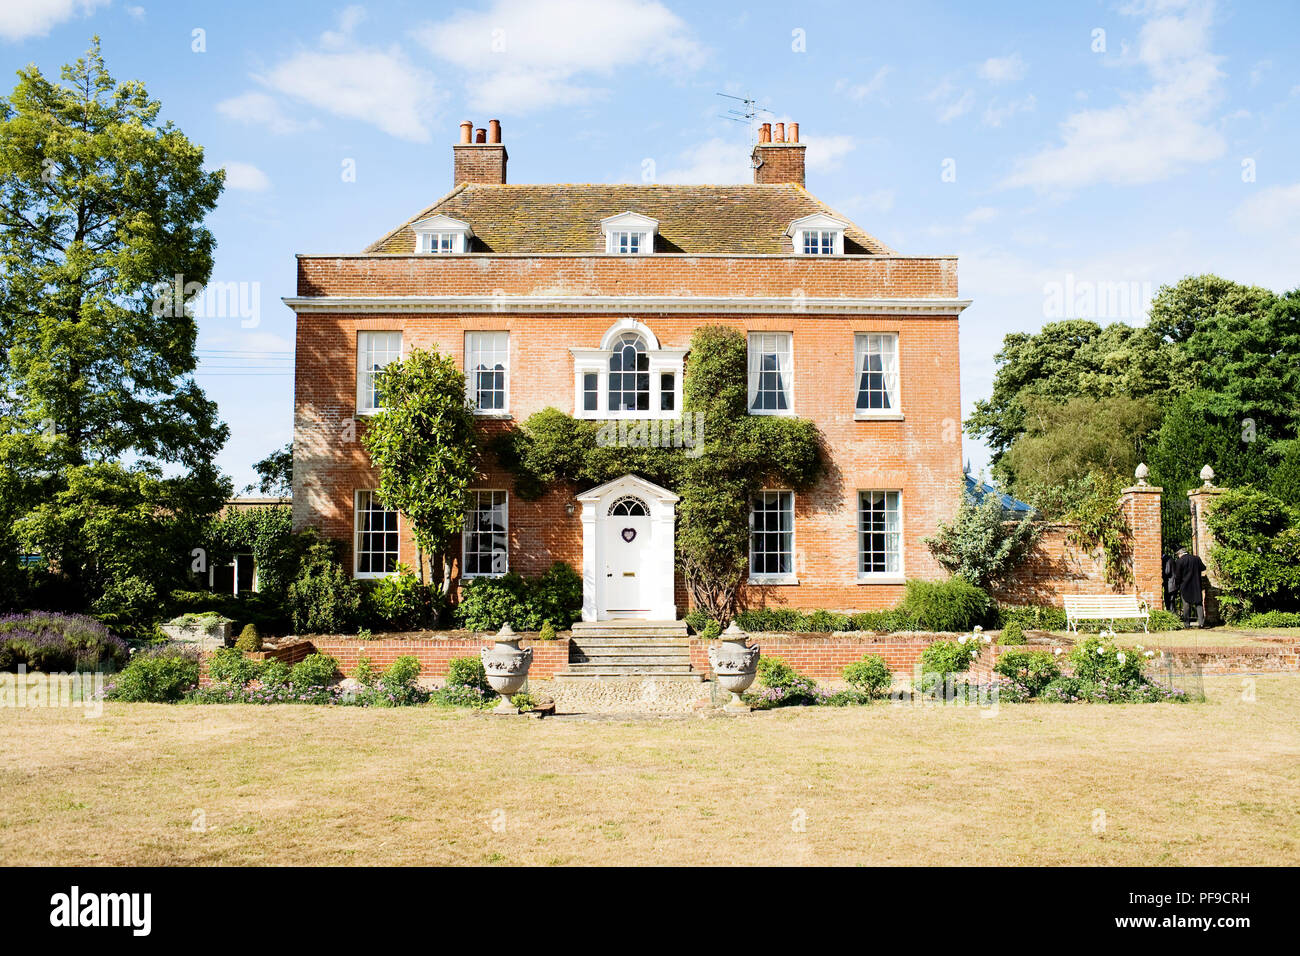 Georgian red brick symmetrical country house in england uk Stock Photo